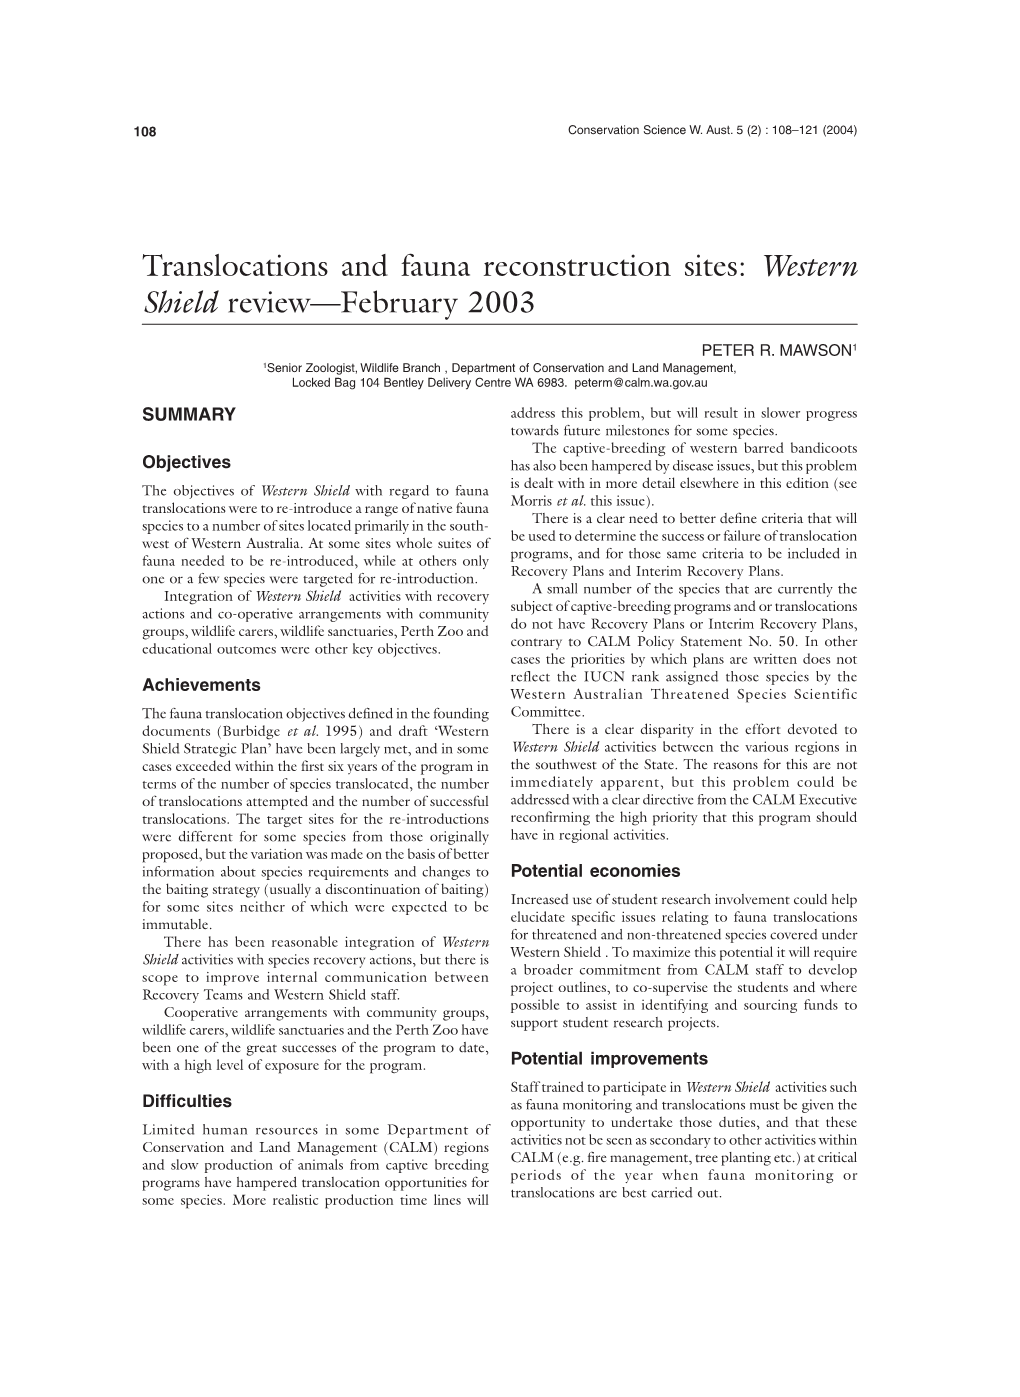 Translocations and Fauna Reconstruction Sites: Western Shield Review—February 2003